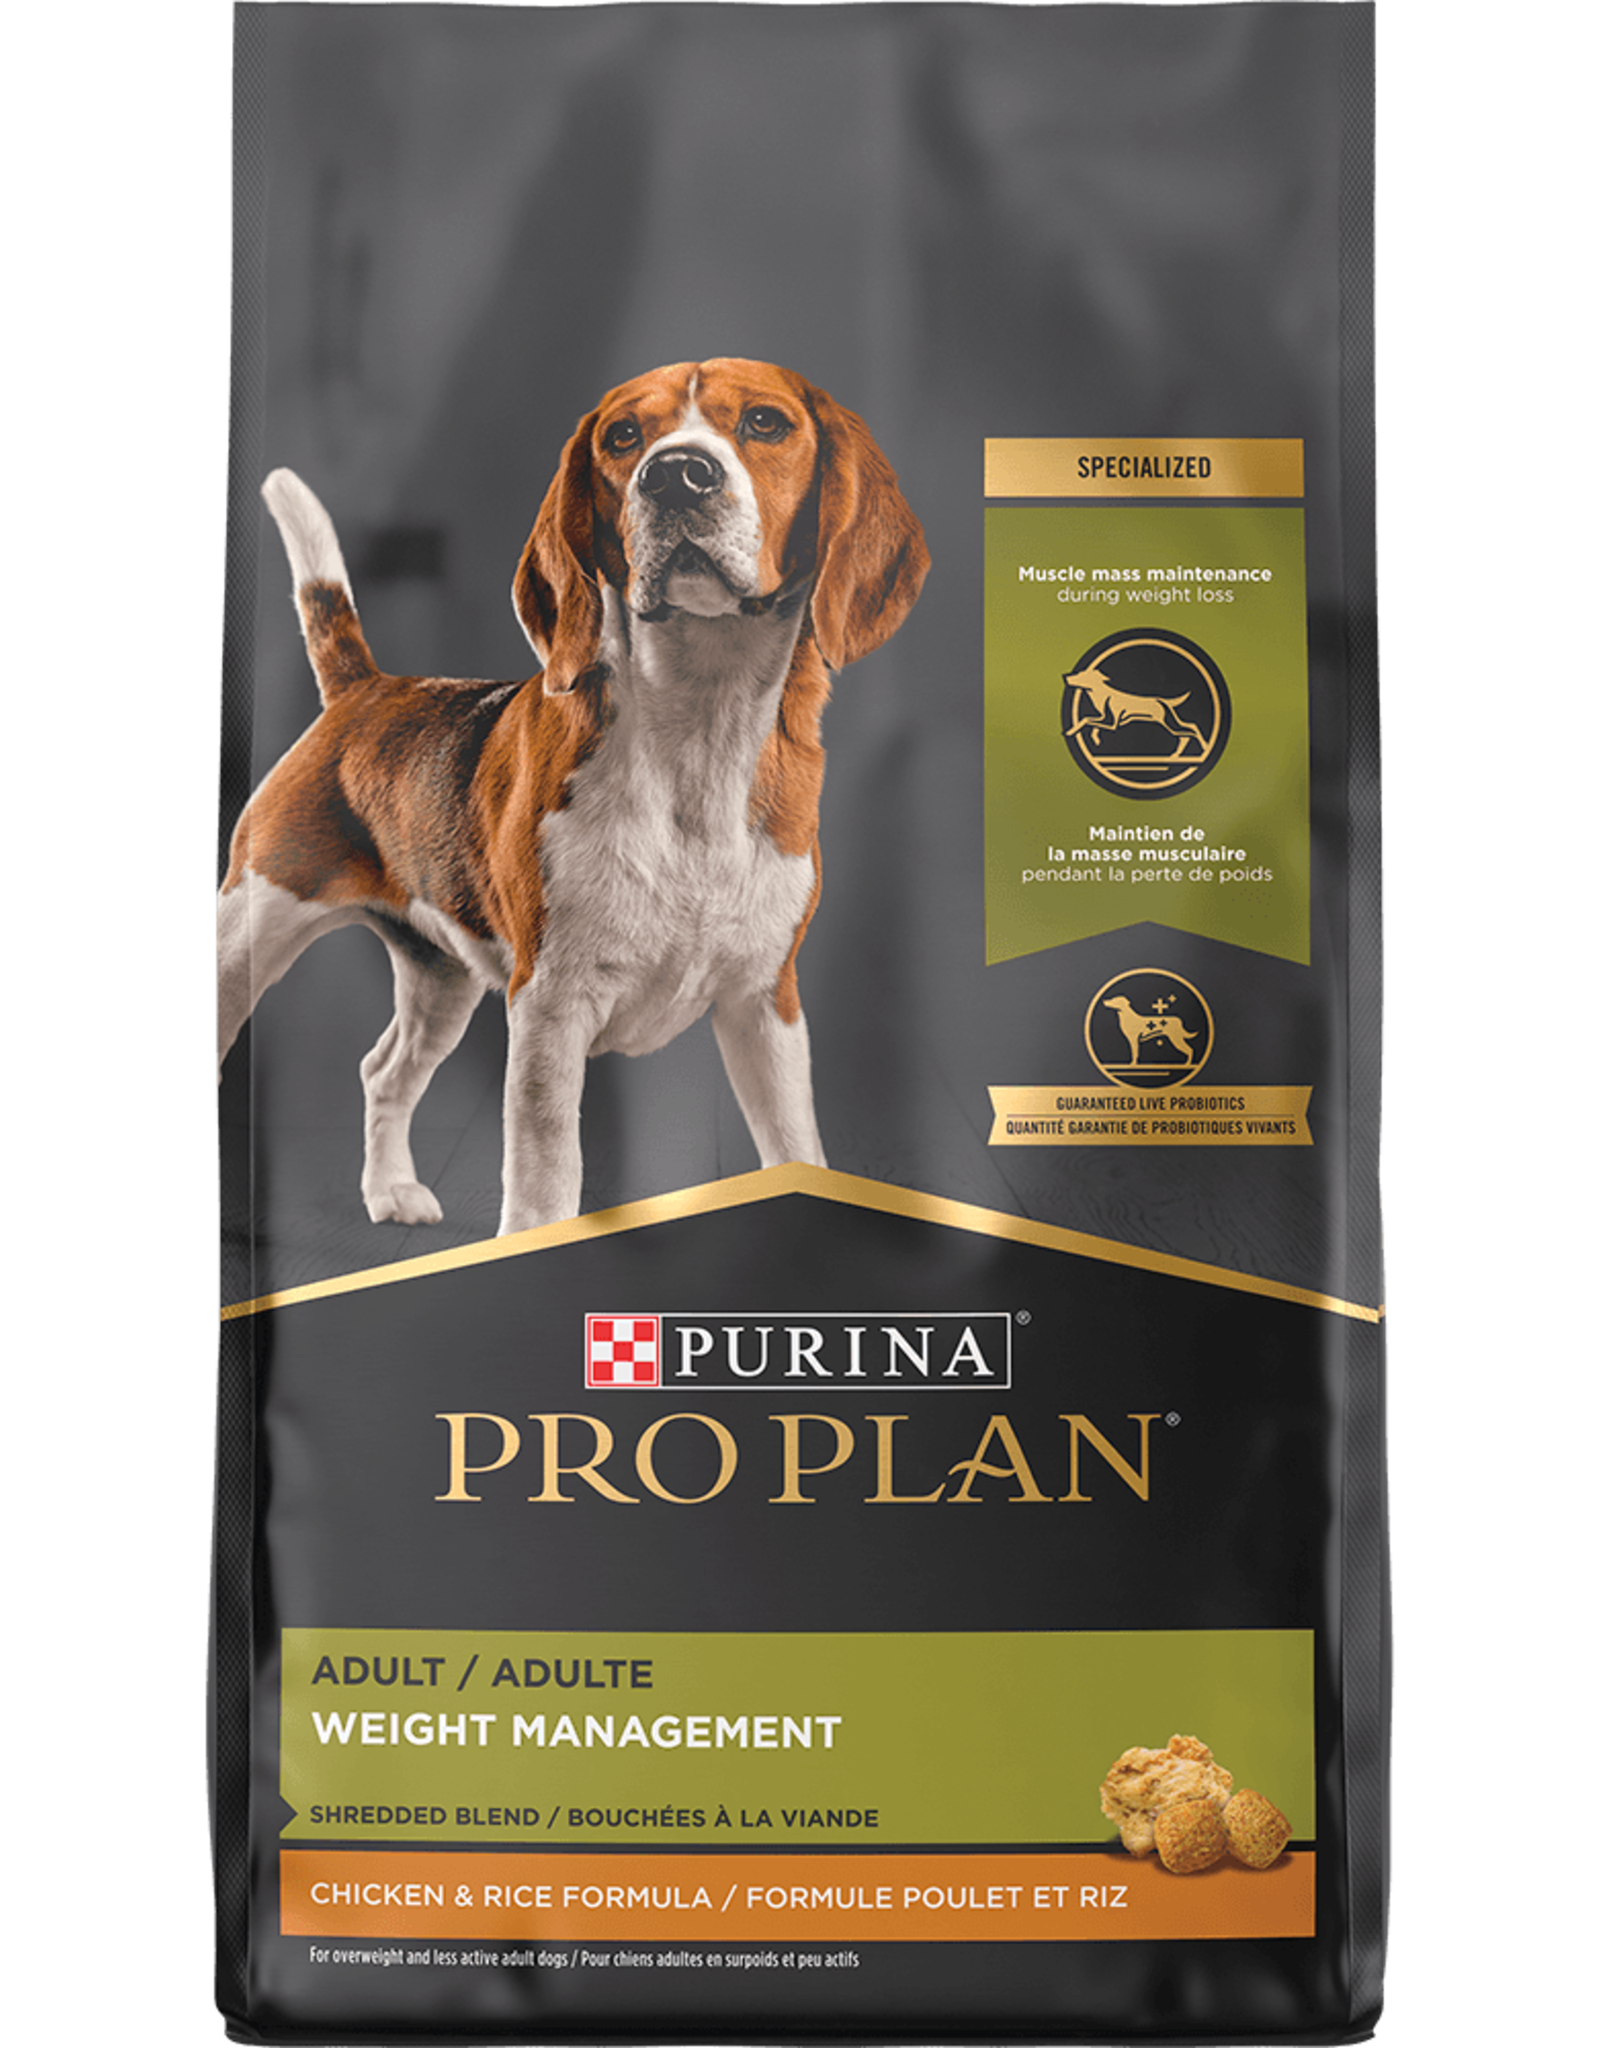 NESTLE PURINA PETCARE PRO PLAN DOG SHREDDED WEIGHT MANAGEMENT 18LBS